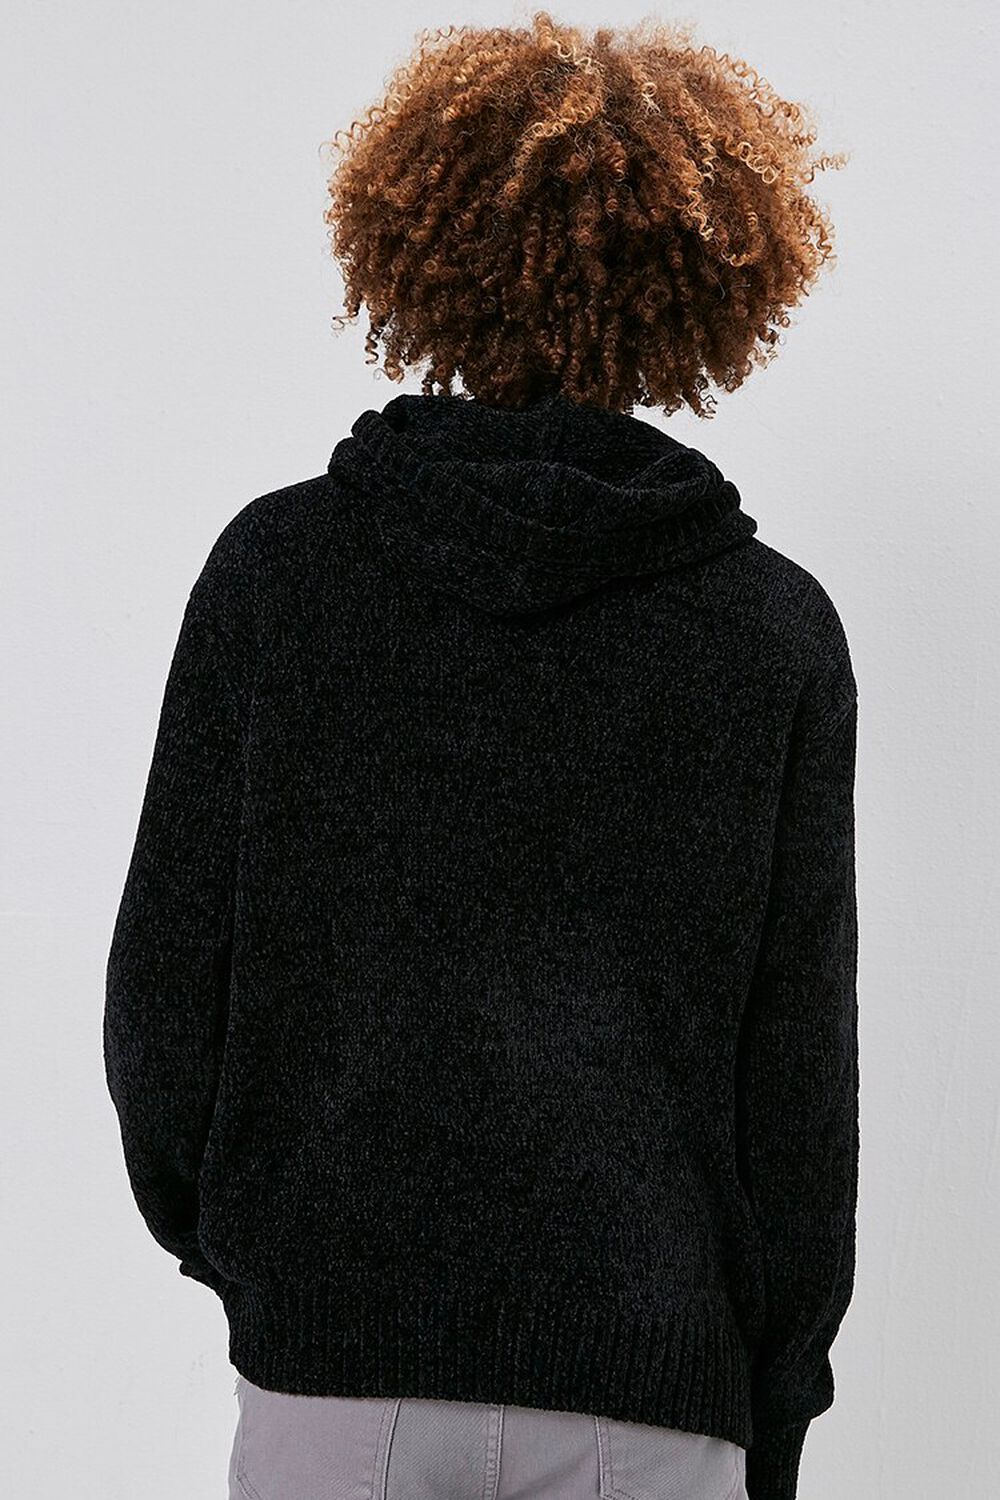 BLACK Chenille Sweater-Knit Hoodie, image 3